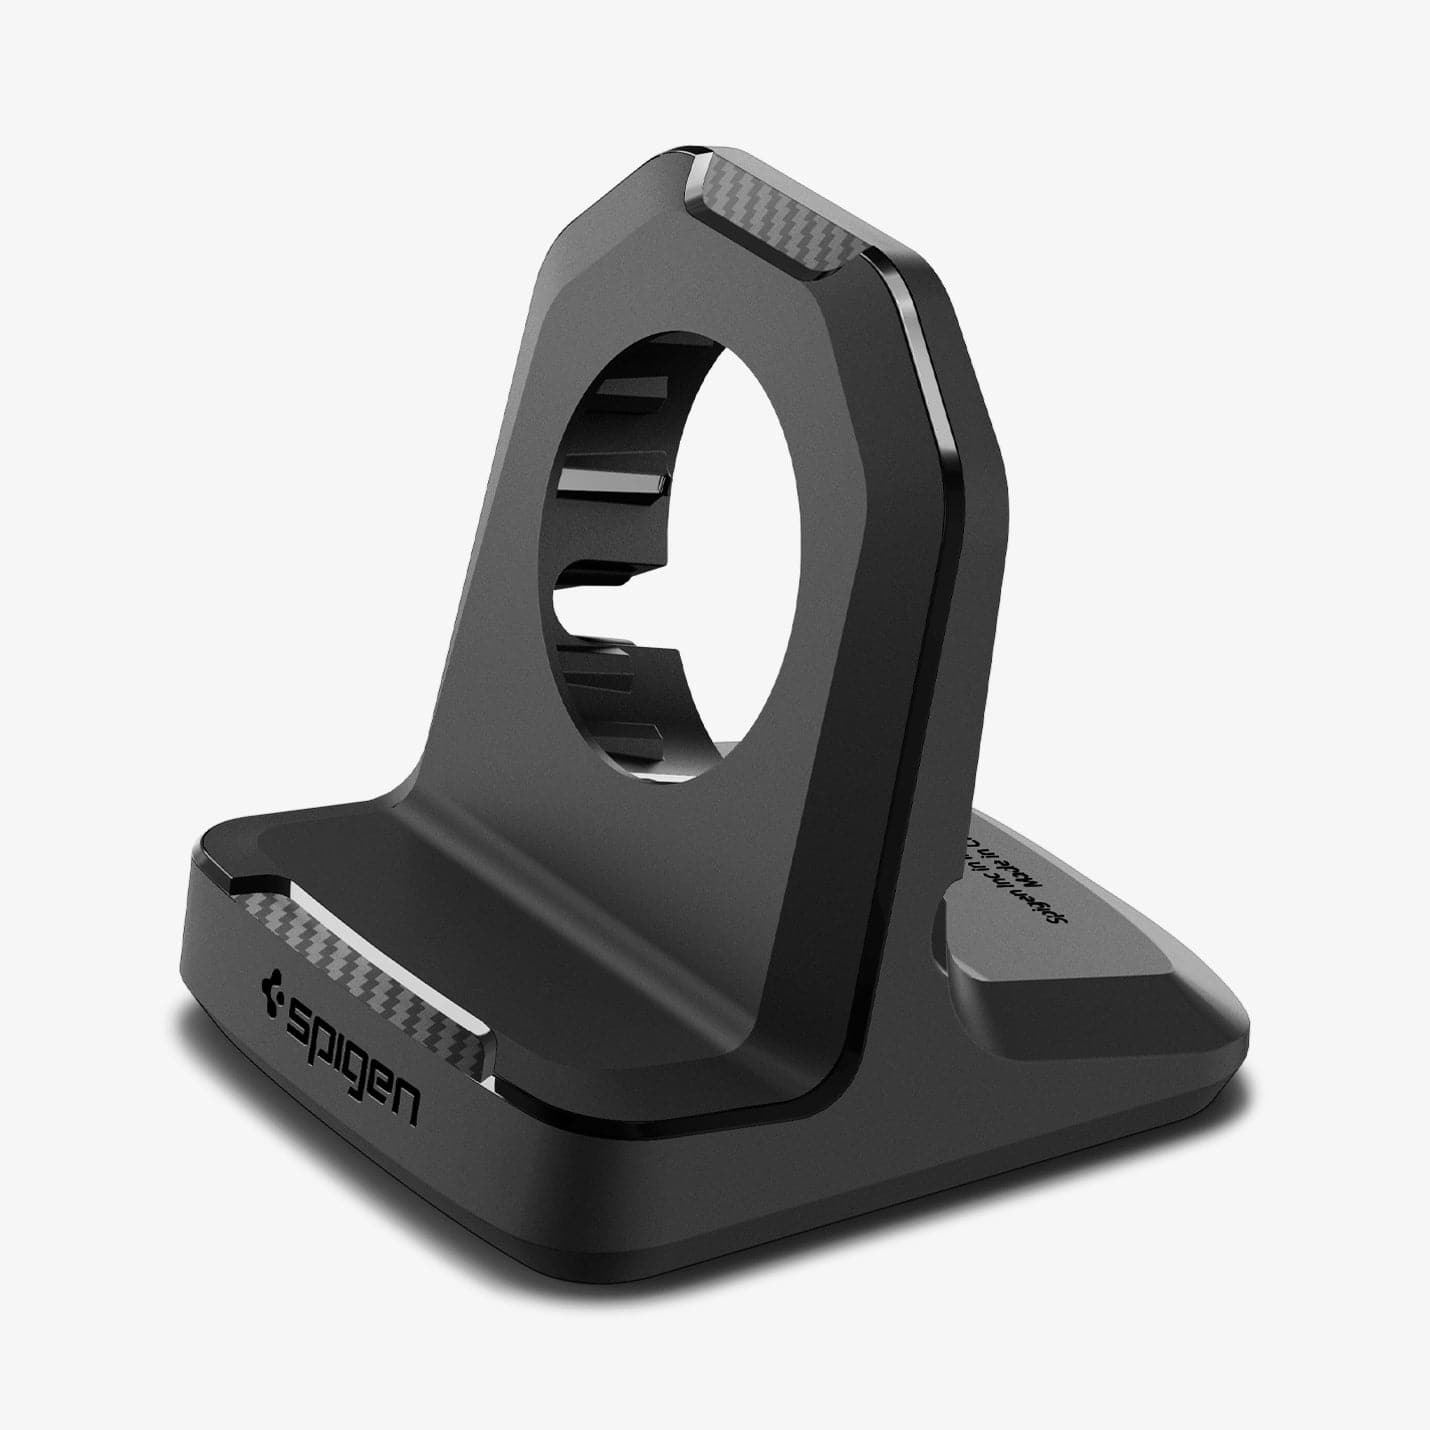 AMP05764 - Apple Watch Rugged Armor Stand in black showing the front and side